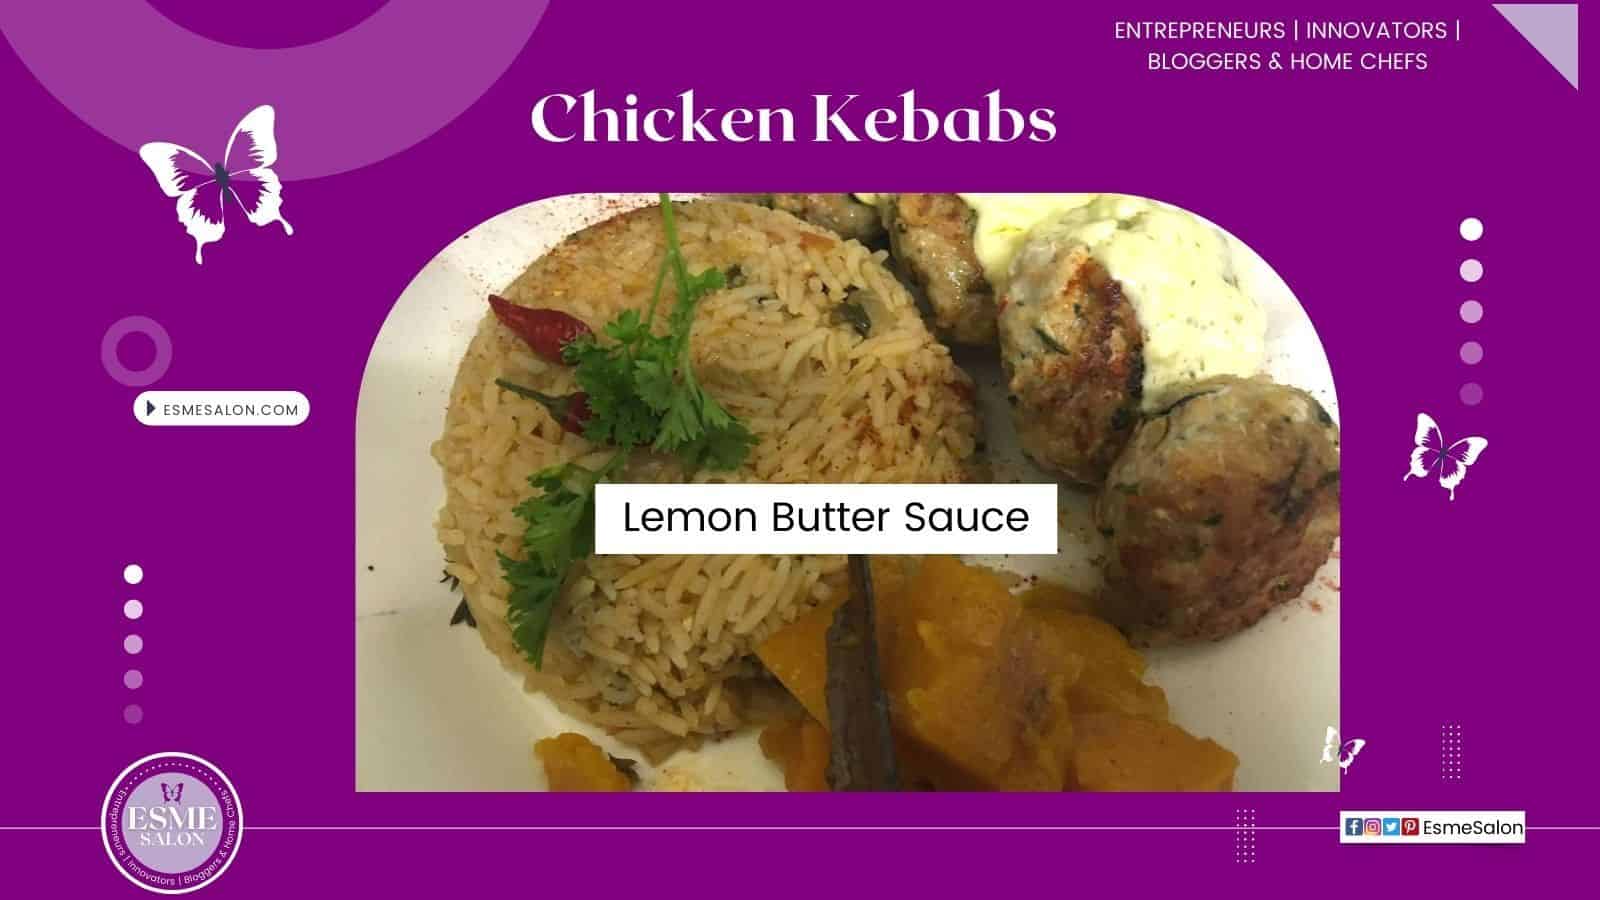 Chicken Kebabs with Lemon Butter Sauce served on rice